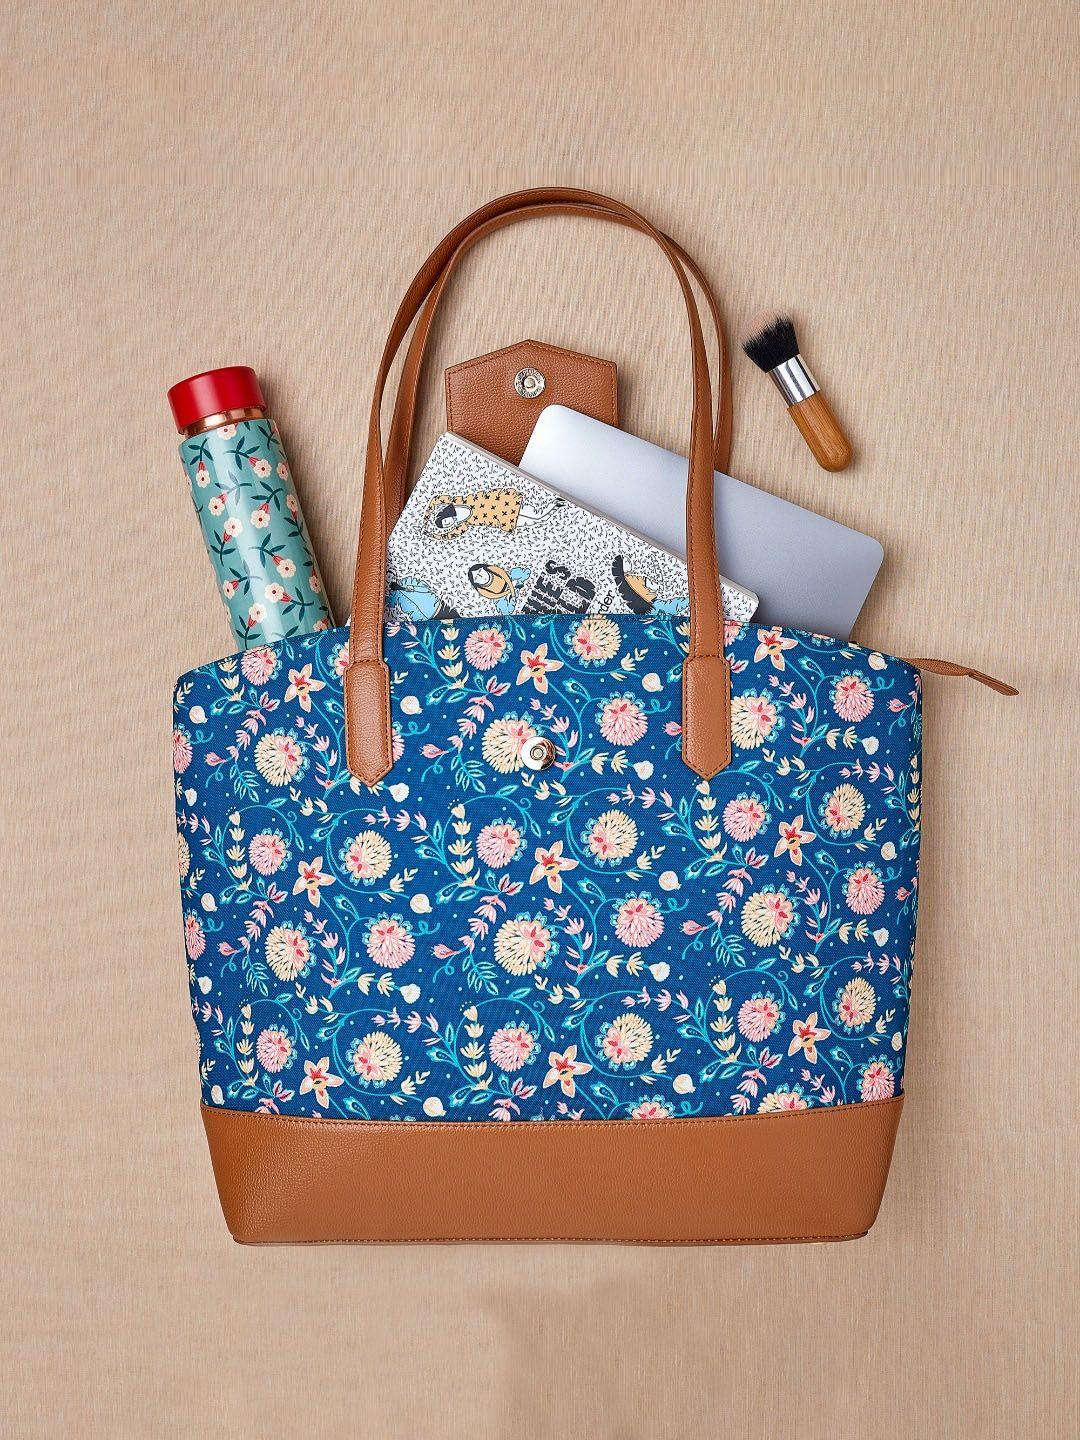 teal by chumbak floral printed structured tote bag